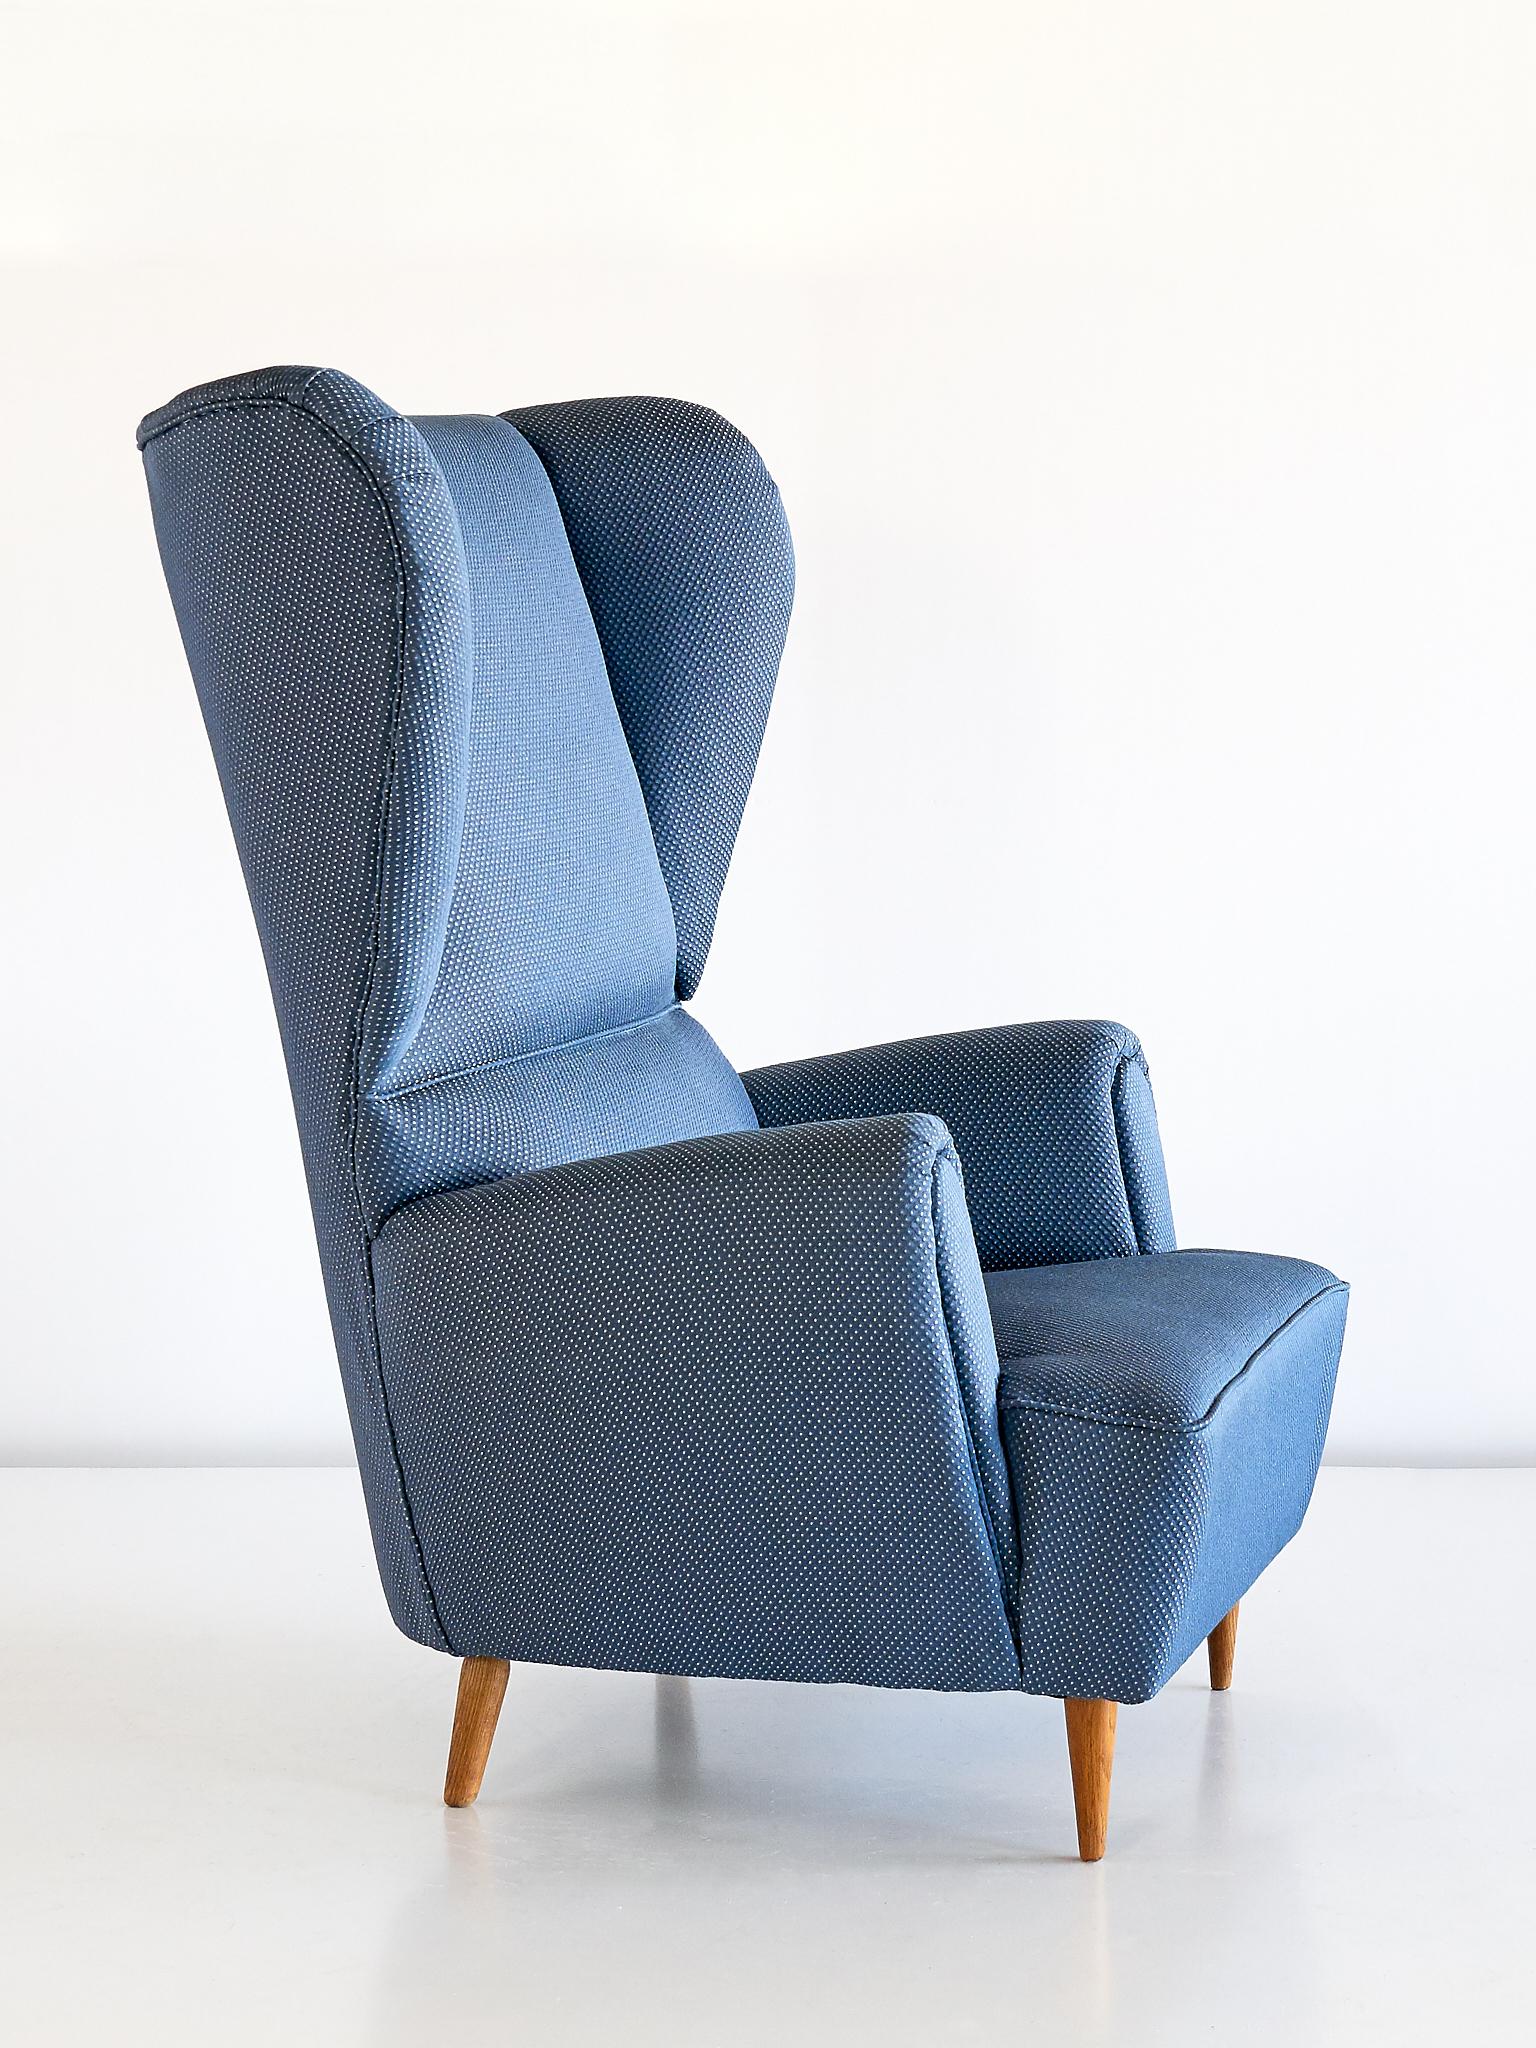 Mid-20th Century Paolo Buffa High Wingback Chair Upholstered in Blue Rubelli Fabric, Italy, 1940s